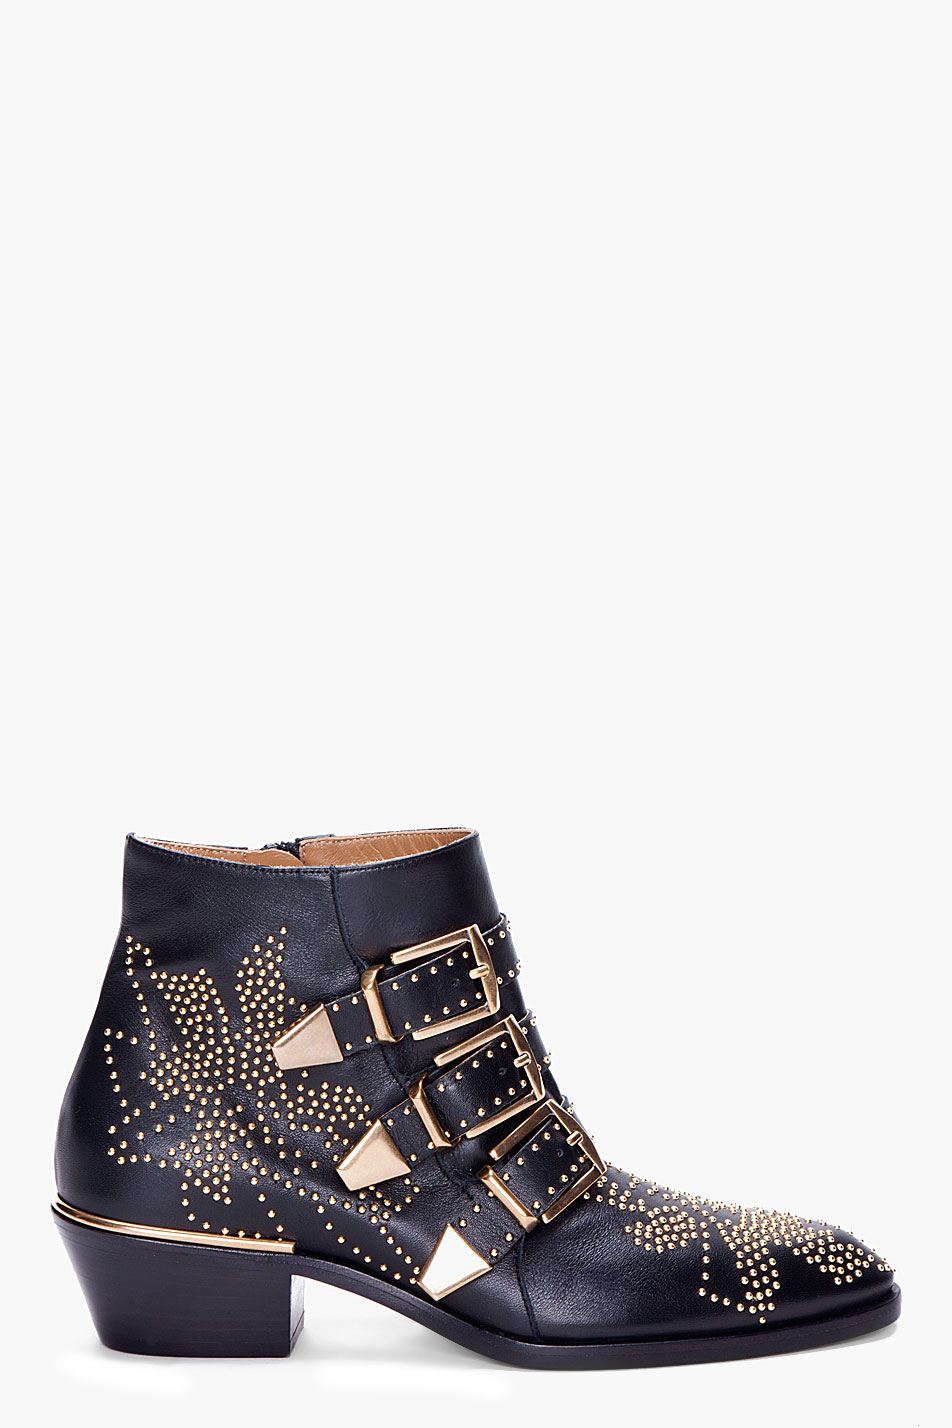 Chloé Black Studded Booties in Black | Lyst